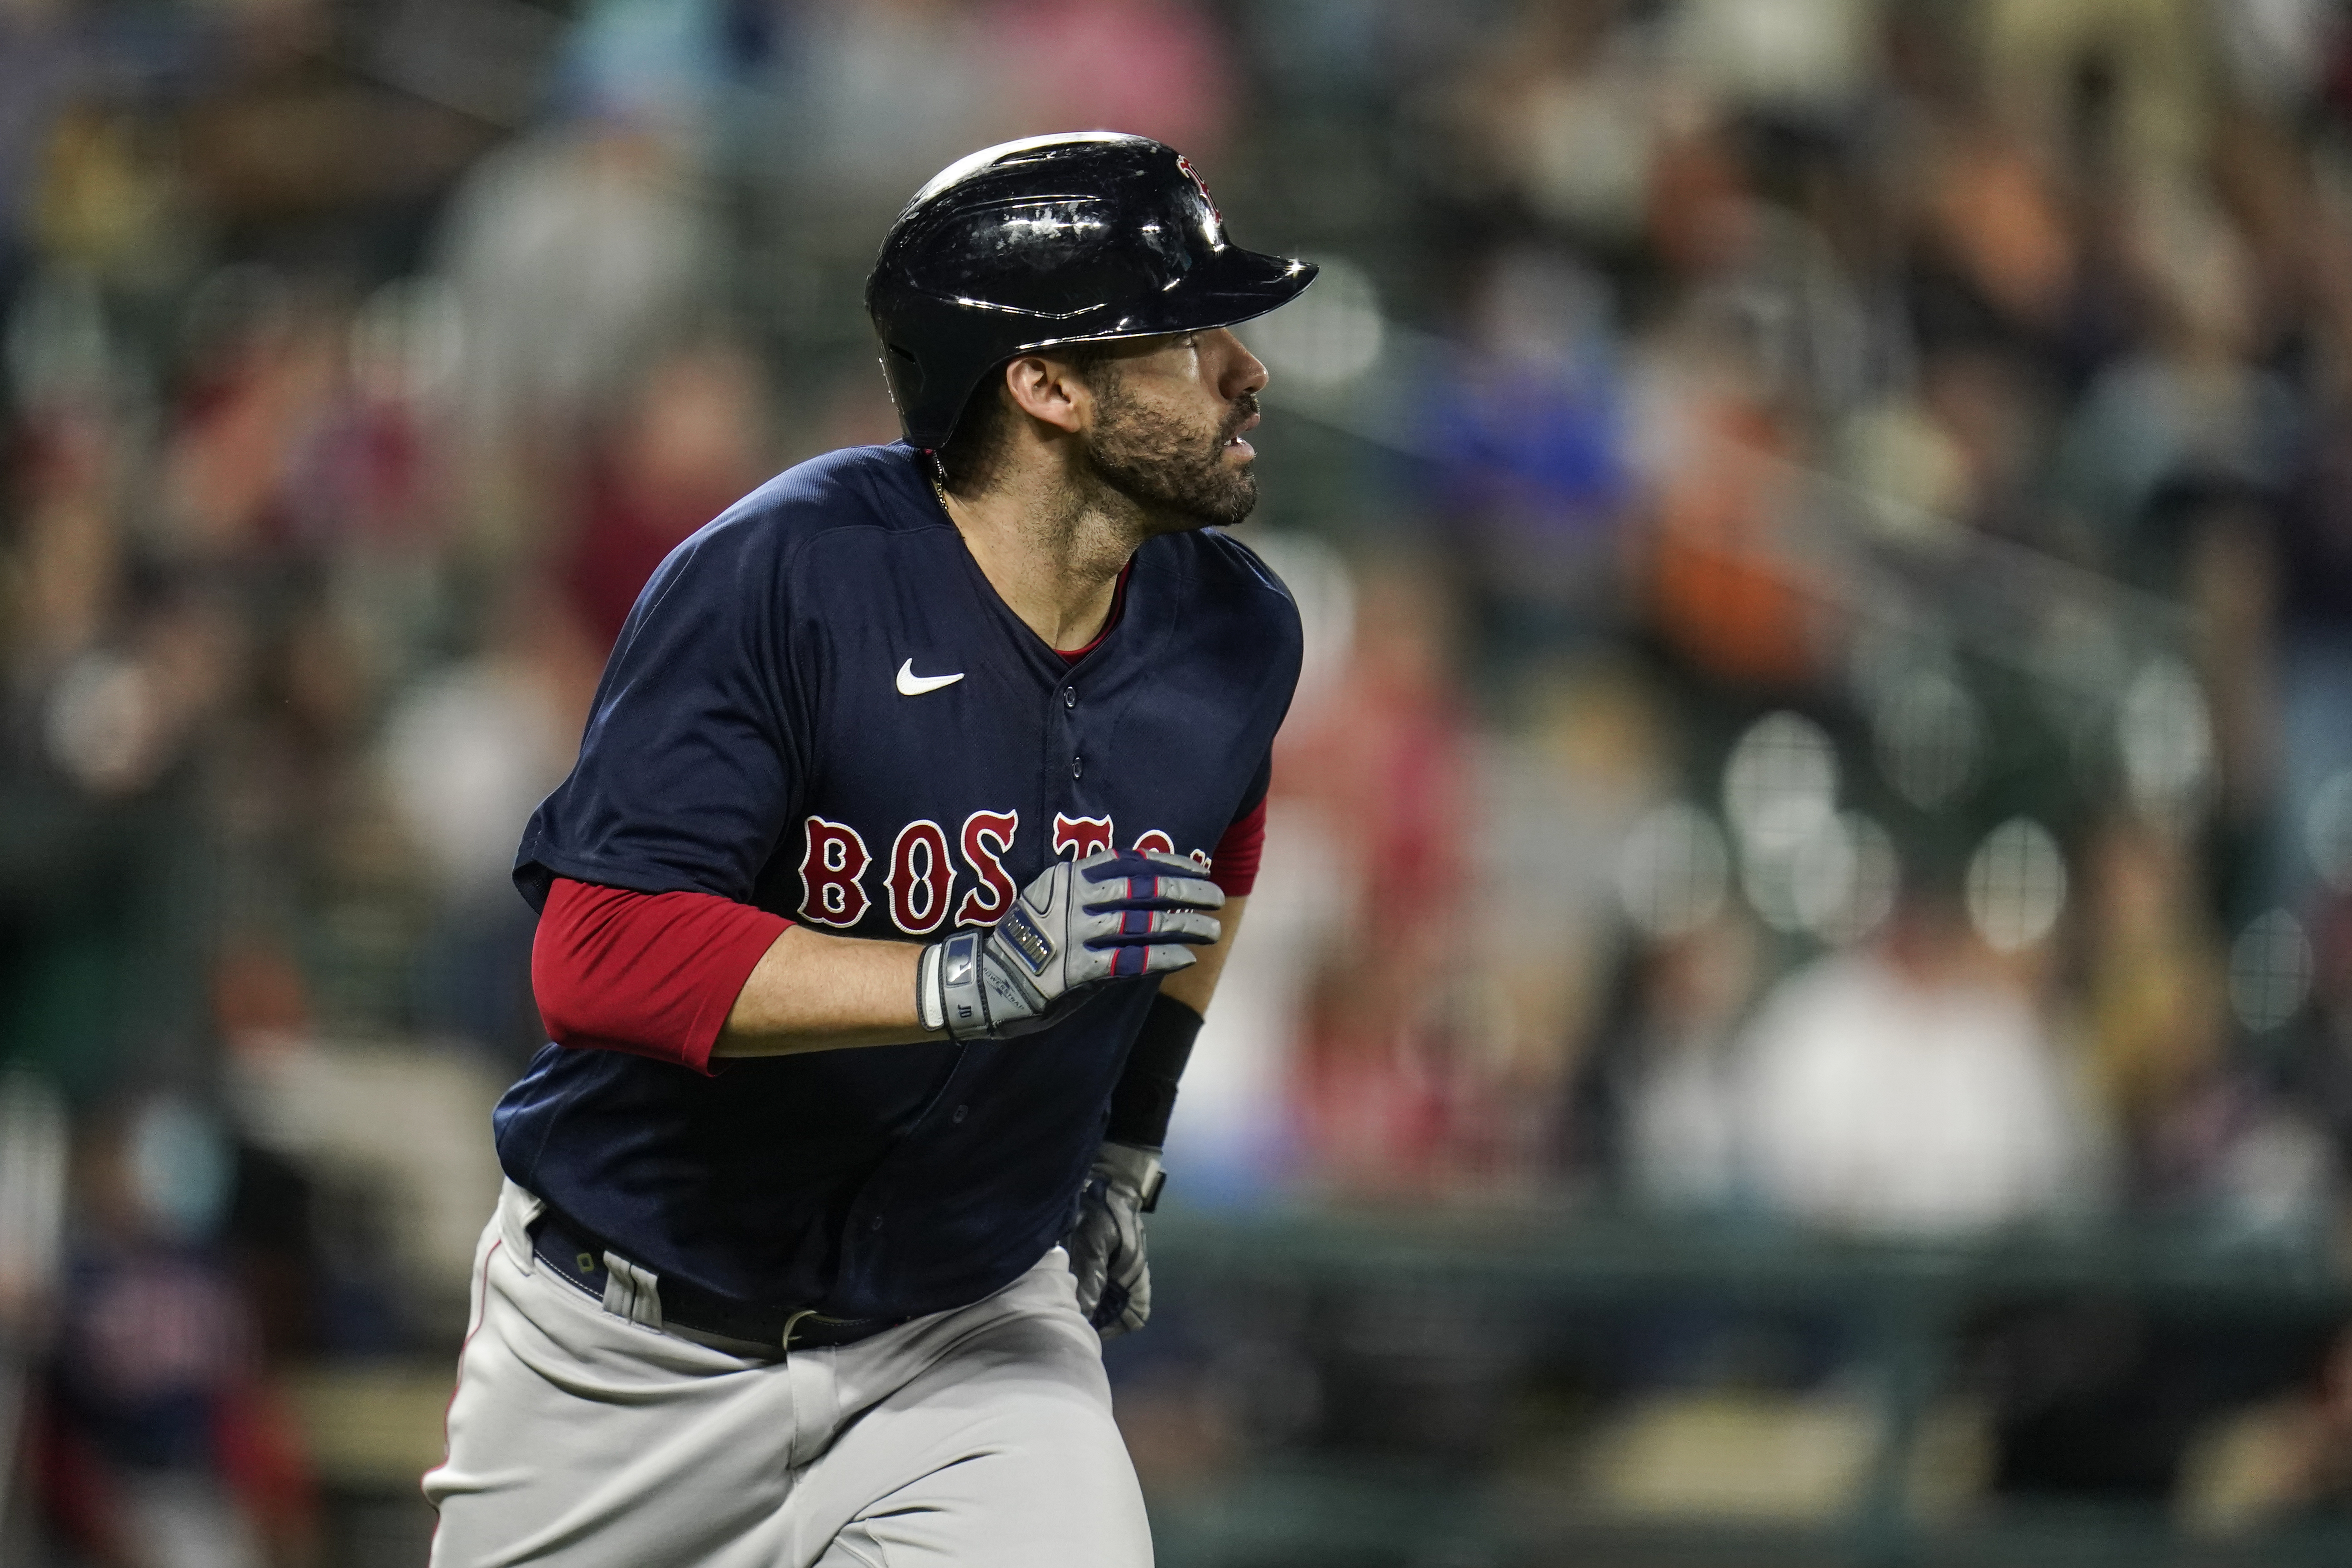 Back at the All-Star Game, Red Sox slugger J.D. Martinez says he's